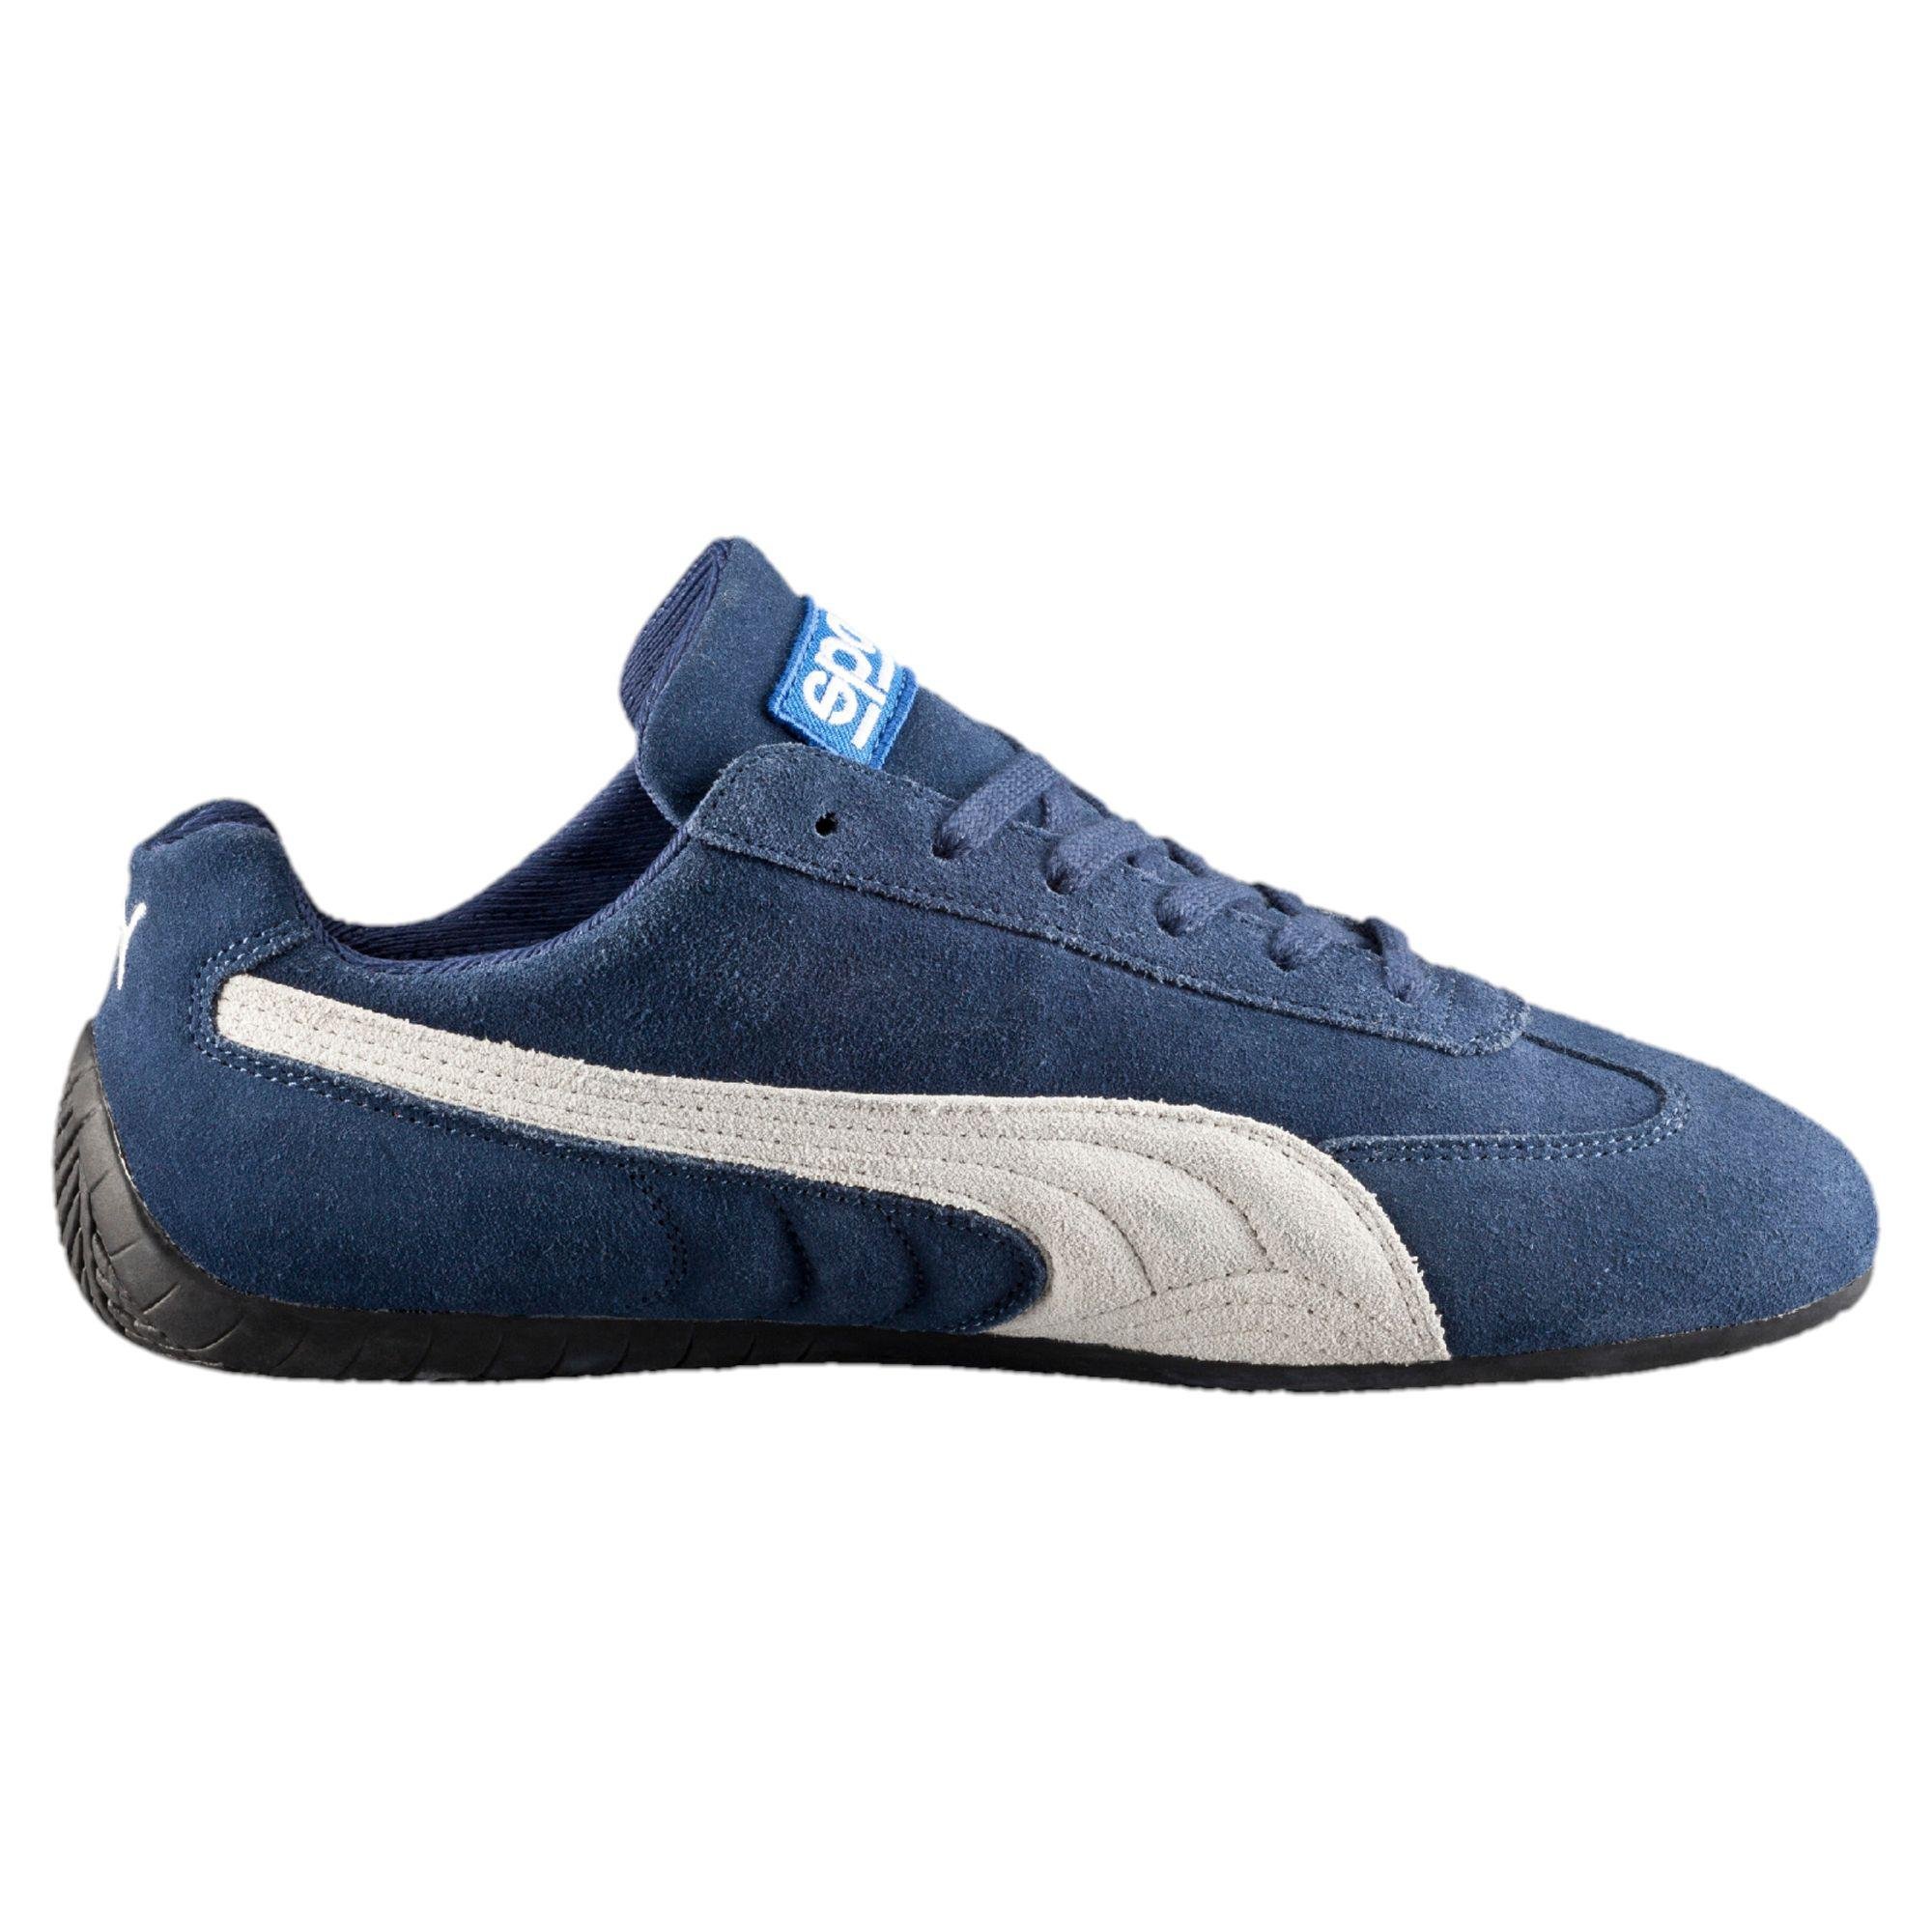 PUMA Suede Speed Cat Sparco Shoes in Blue for Men - Lyst